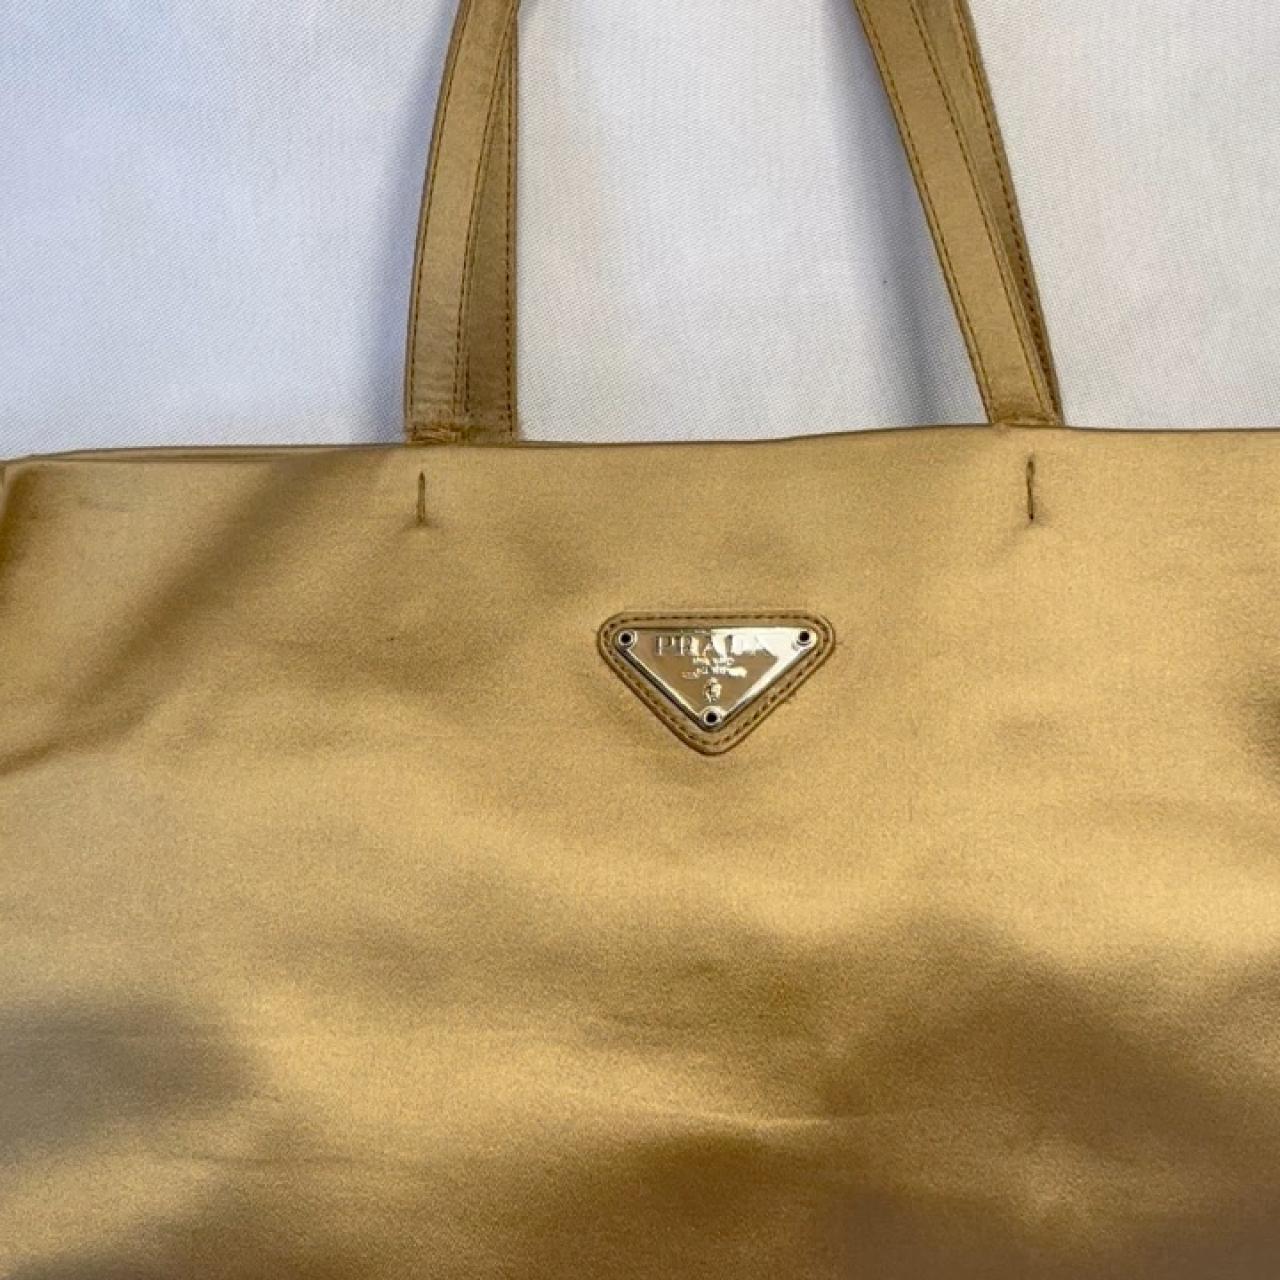 Prada Satin Bag With Crystals (Gold) – The Luxury Shopper